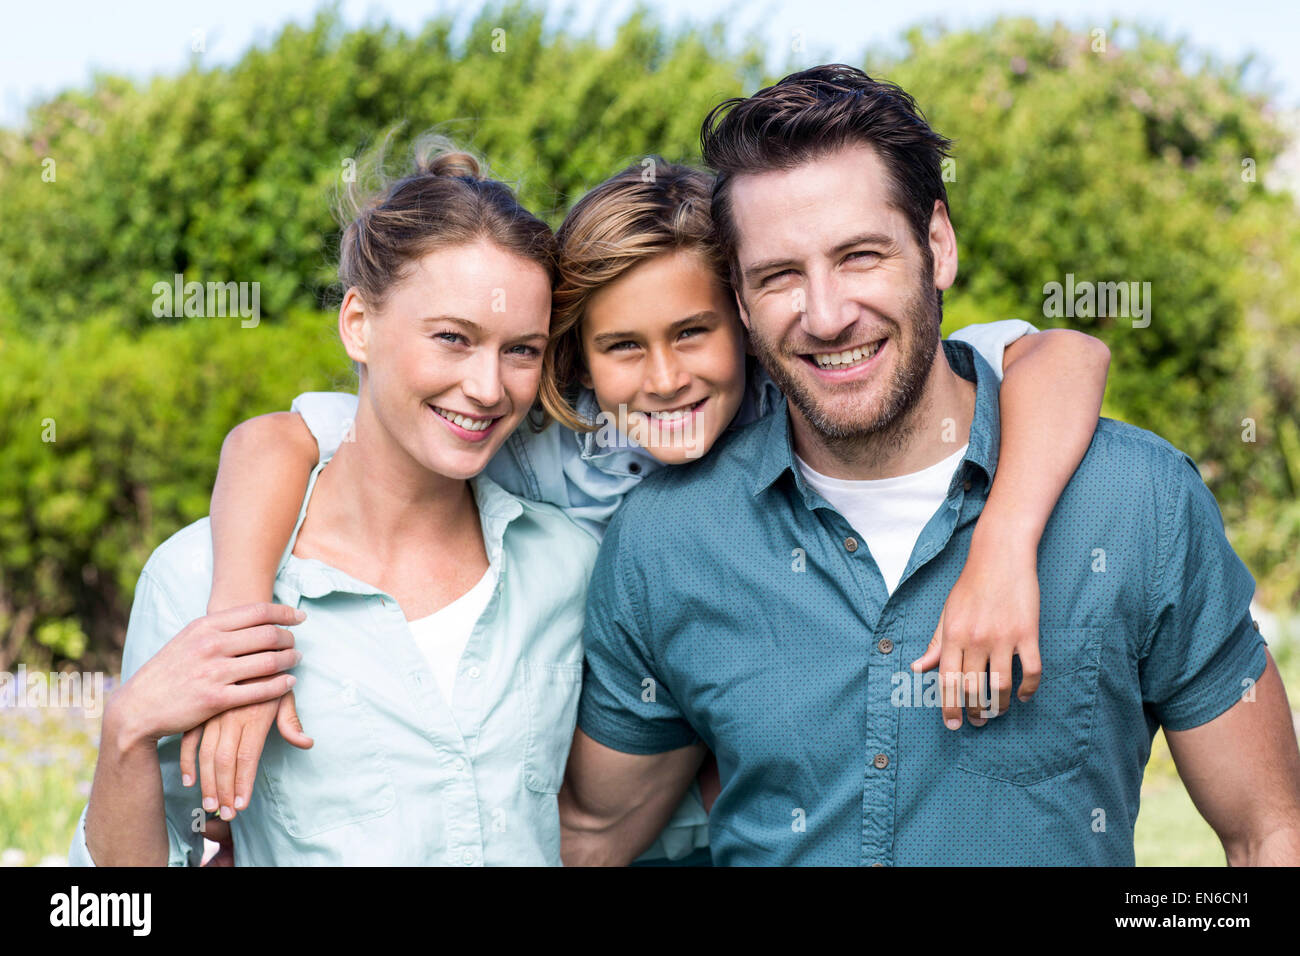 Happy Family smiling at camera Banque D'Images